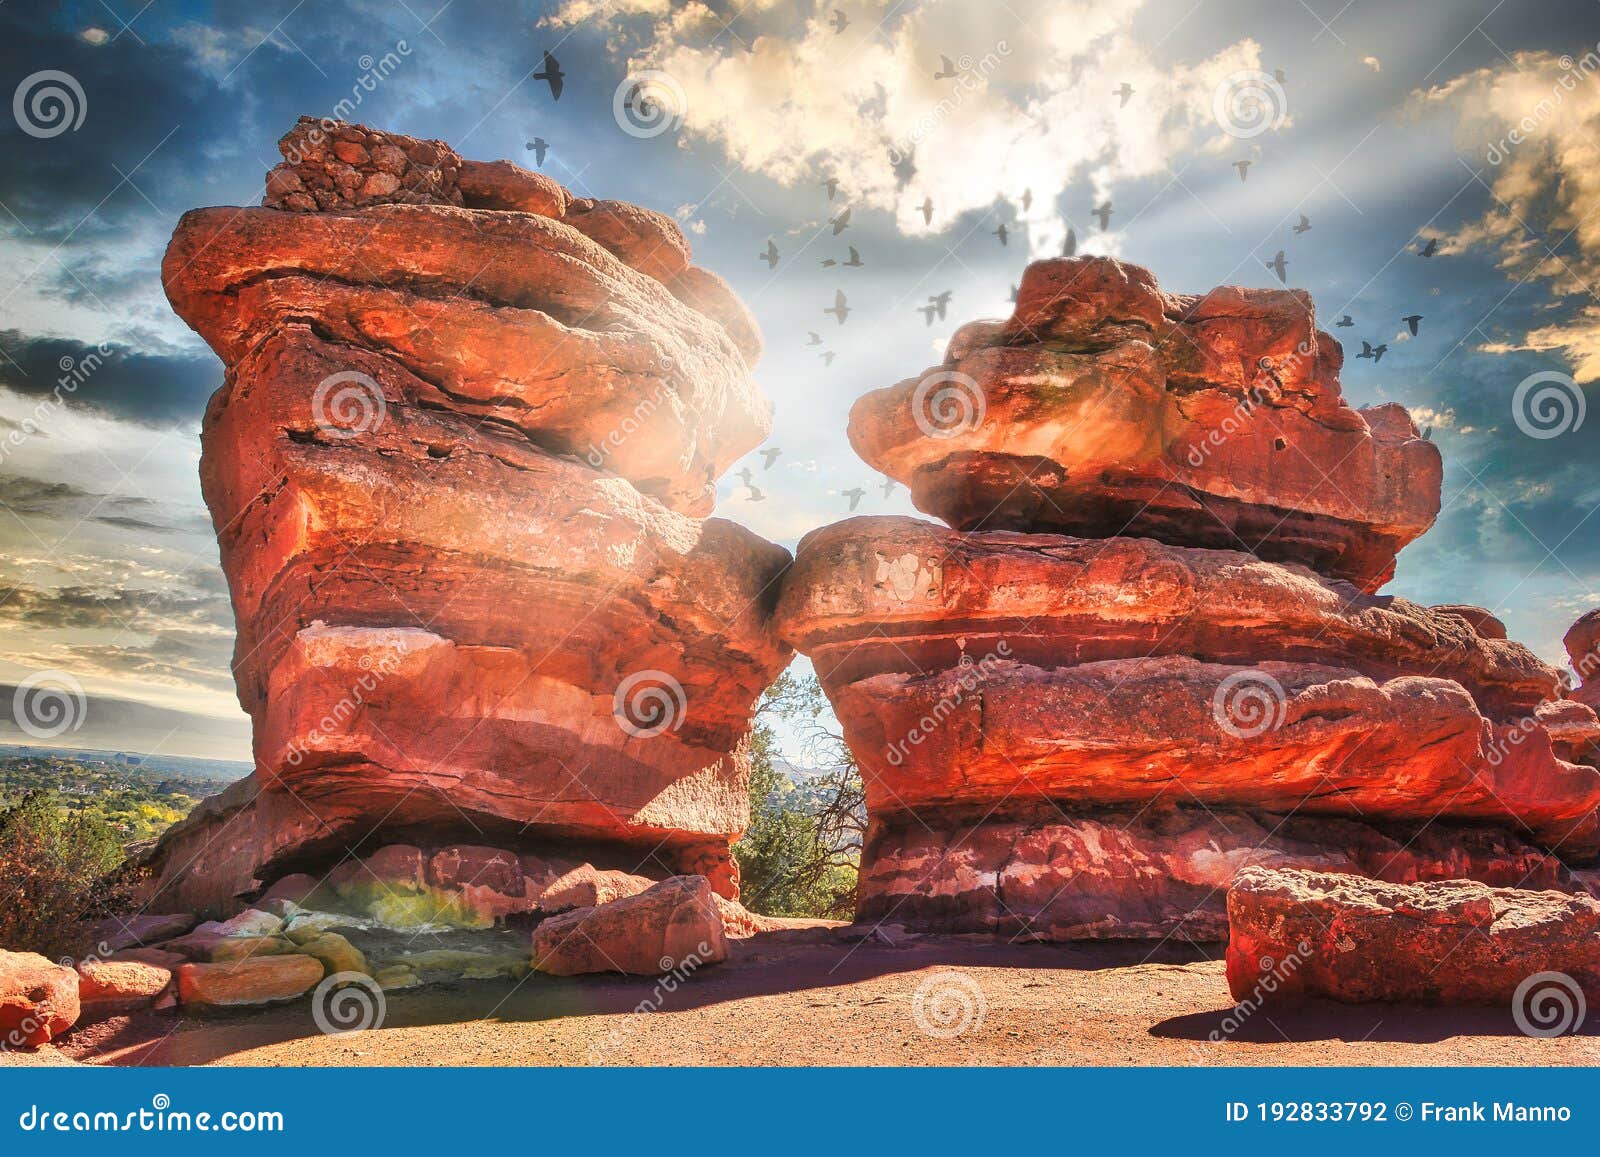 rock formations on rampart range road at garden of the gods park, colorado